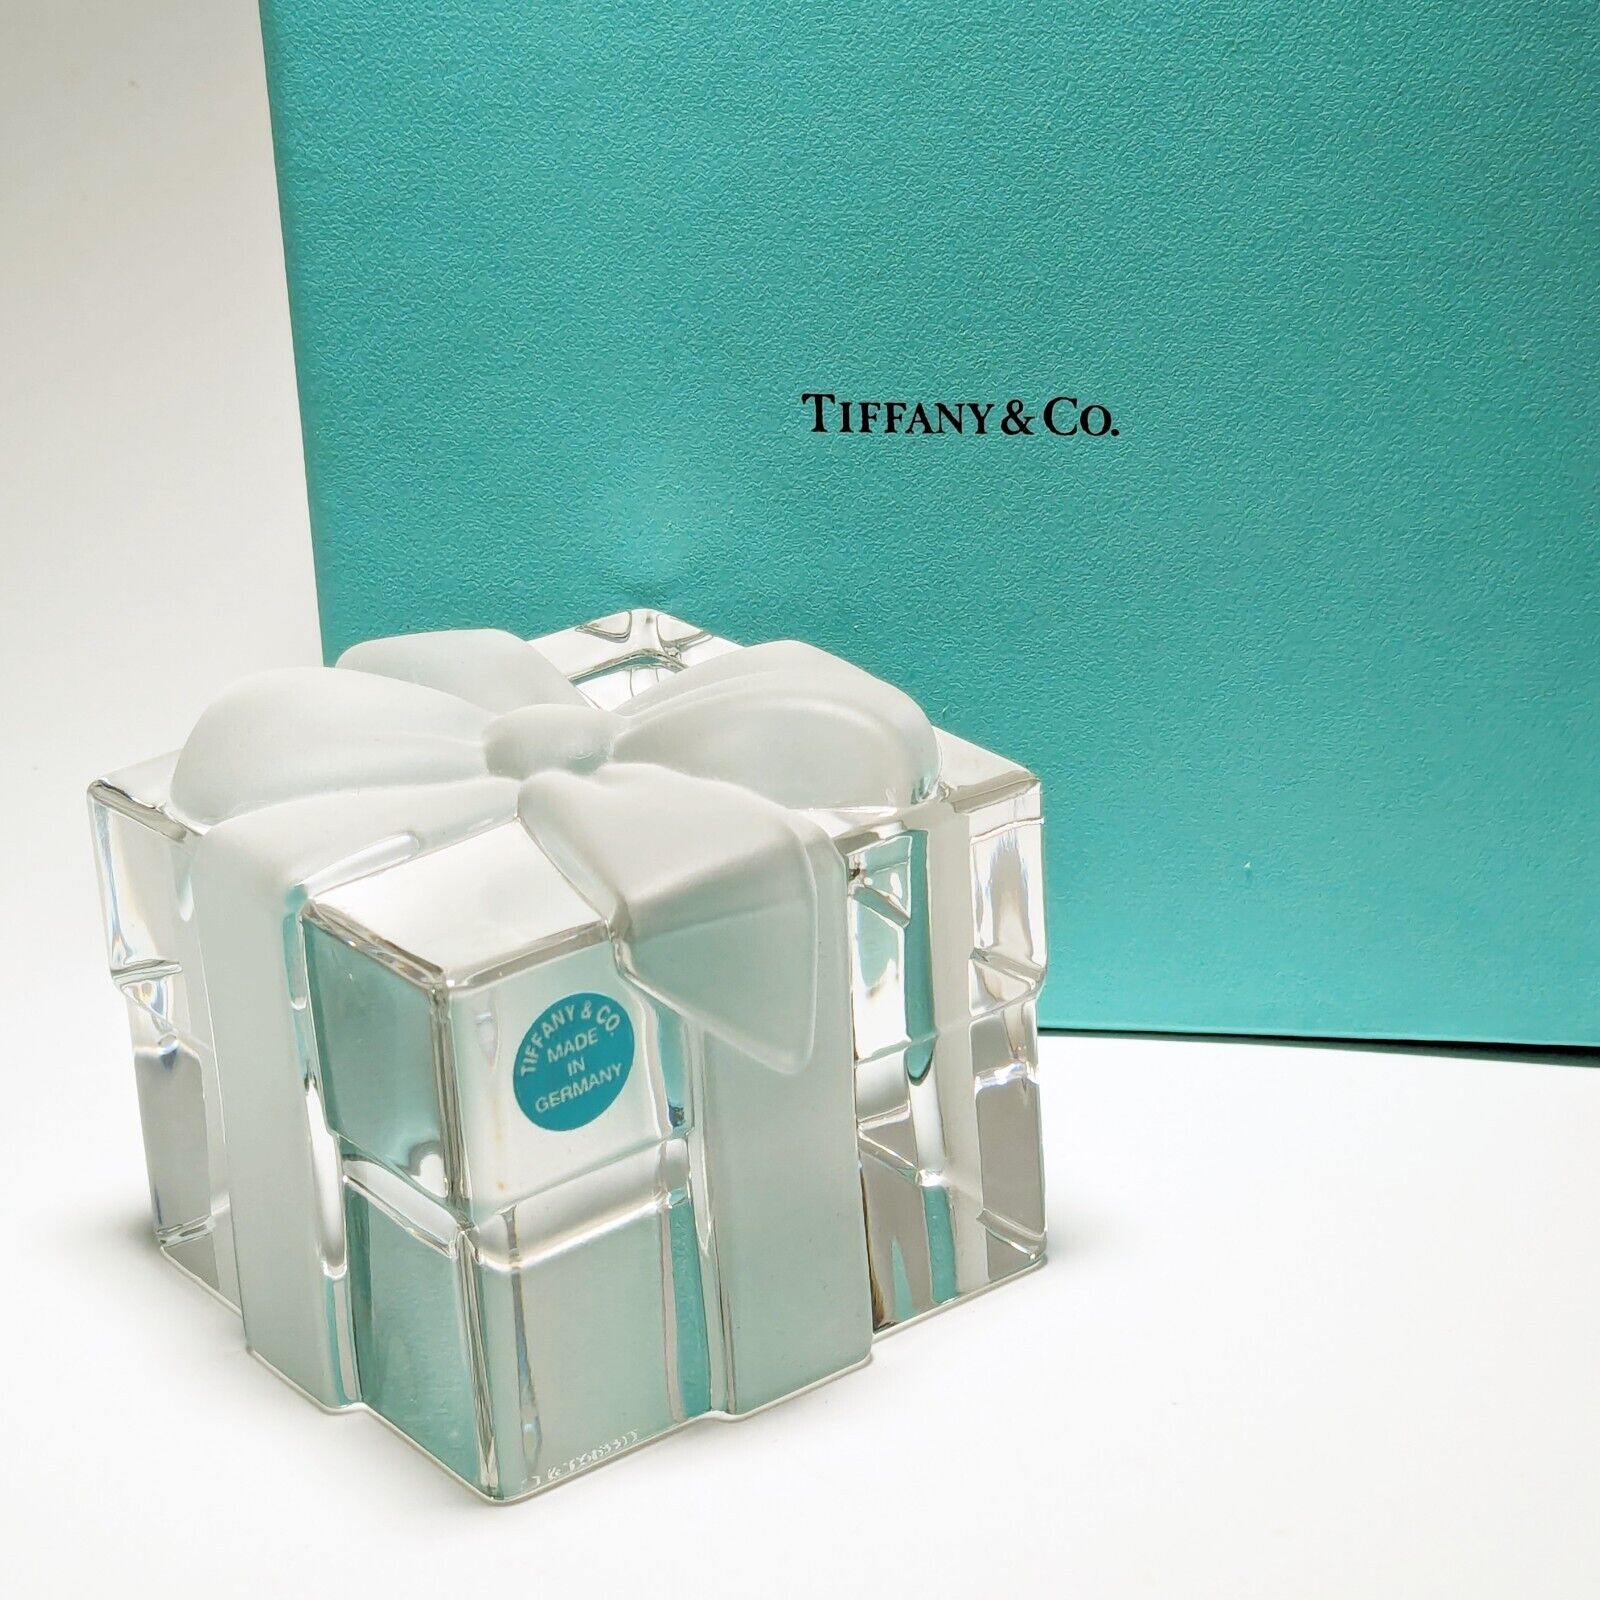 Tiffany & Co. Bow Box Paperweight Solid Crystal Made in Germany